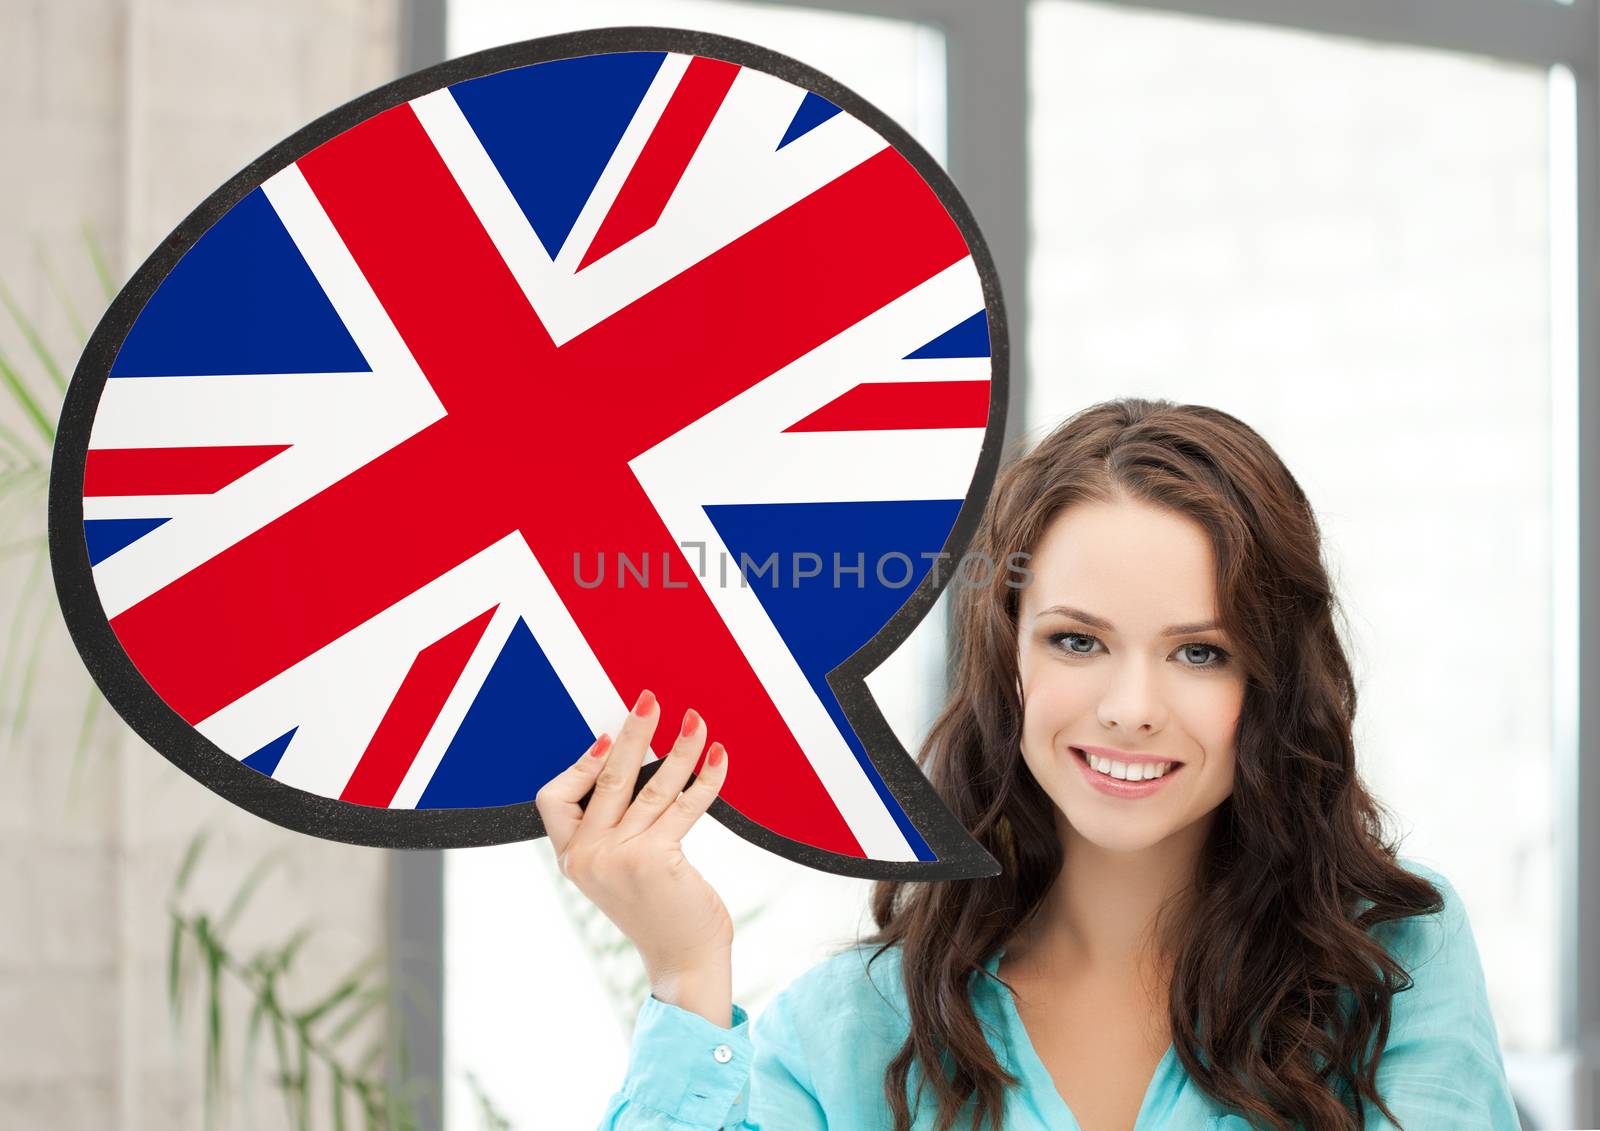 education, foreign language, english, people and communication concept - smiling woman holding text bubble of british flag